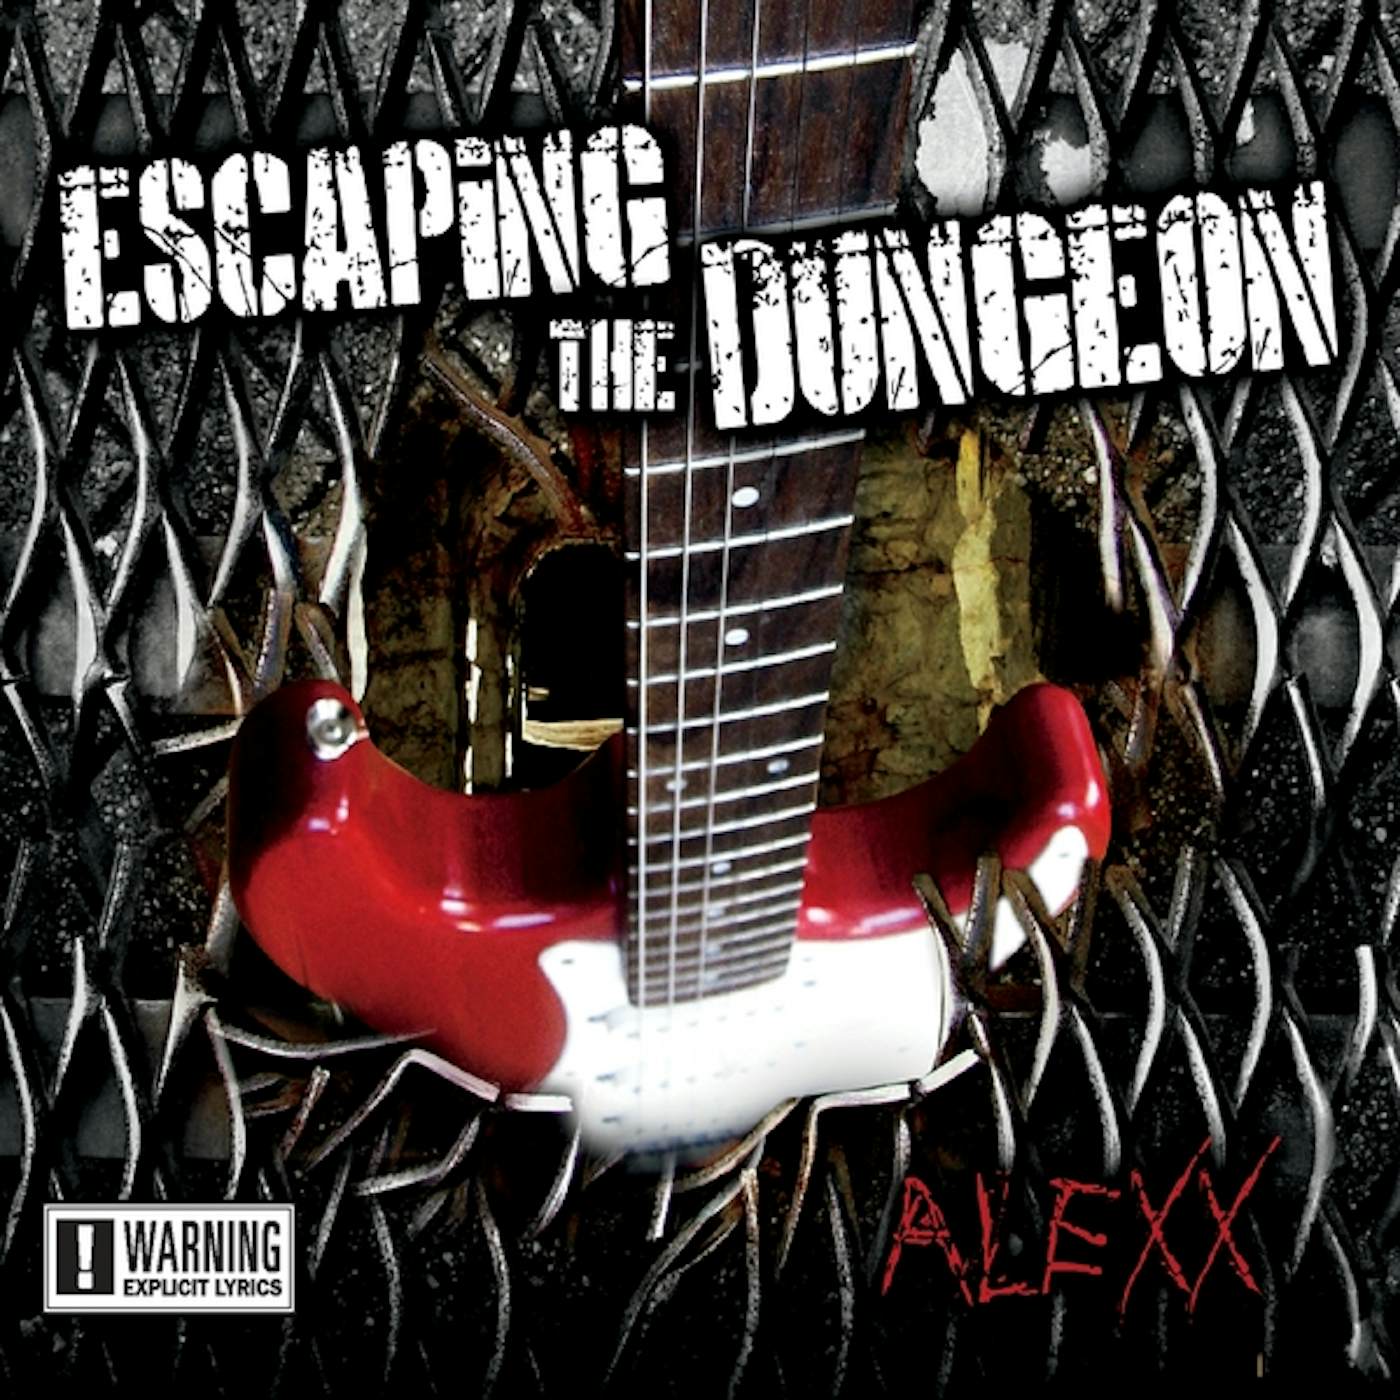 Alexx ESCAPING THE DUNGEON CD